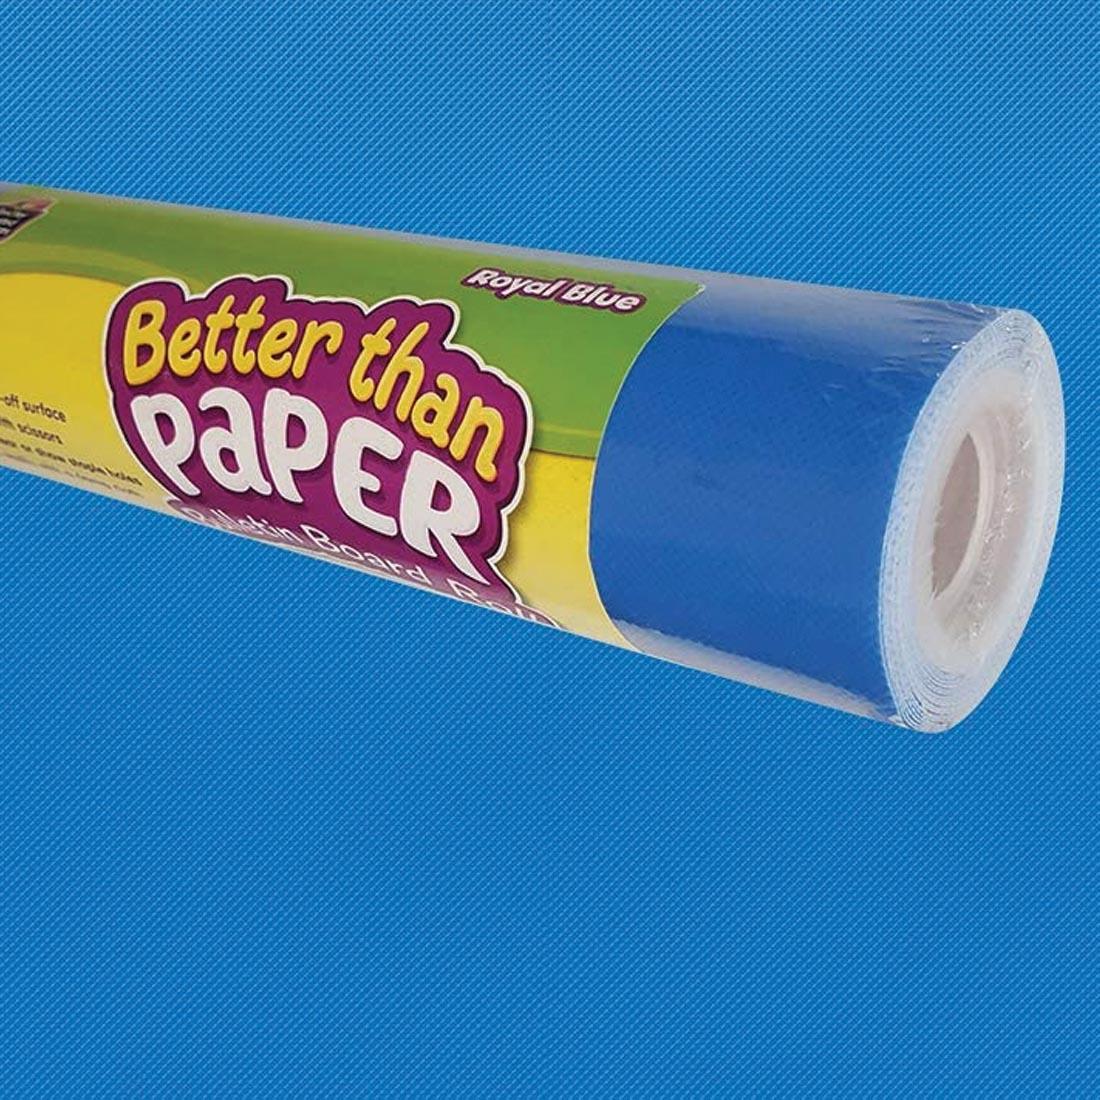 Royal Blue Better Than Paper Bulletin Board Roll with it shown in use in the background